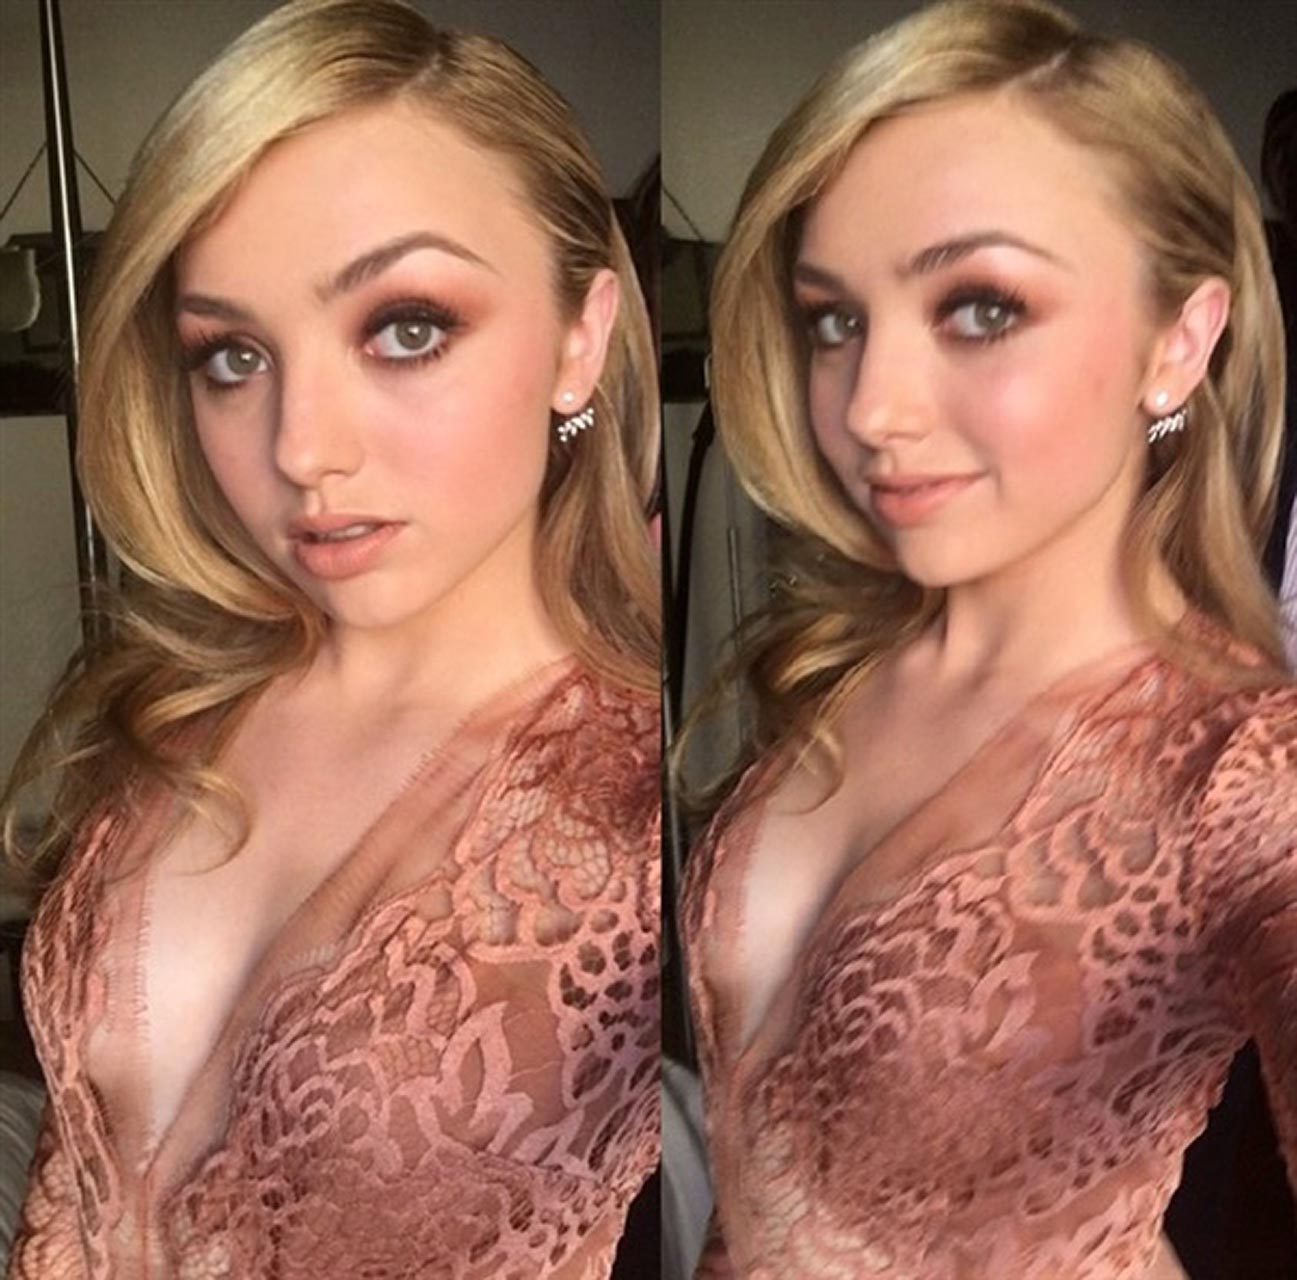 Hot and LEAKED photos of Disney star Peyton List.